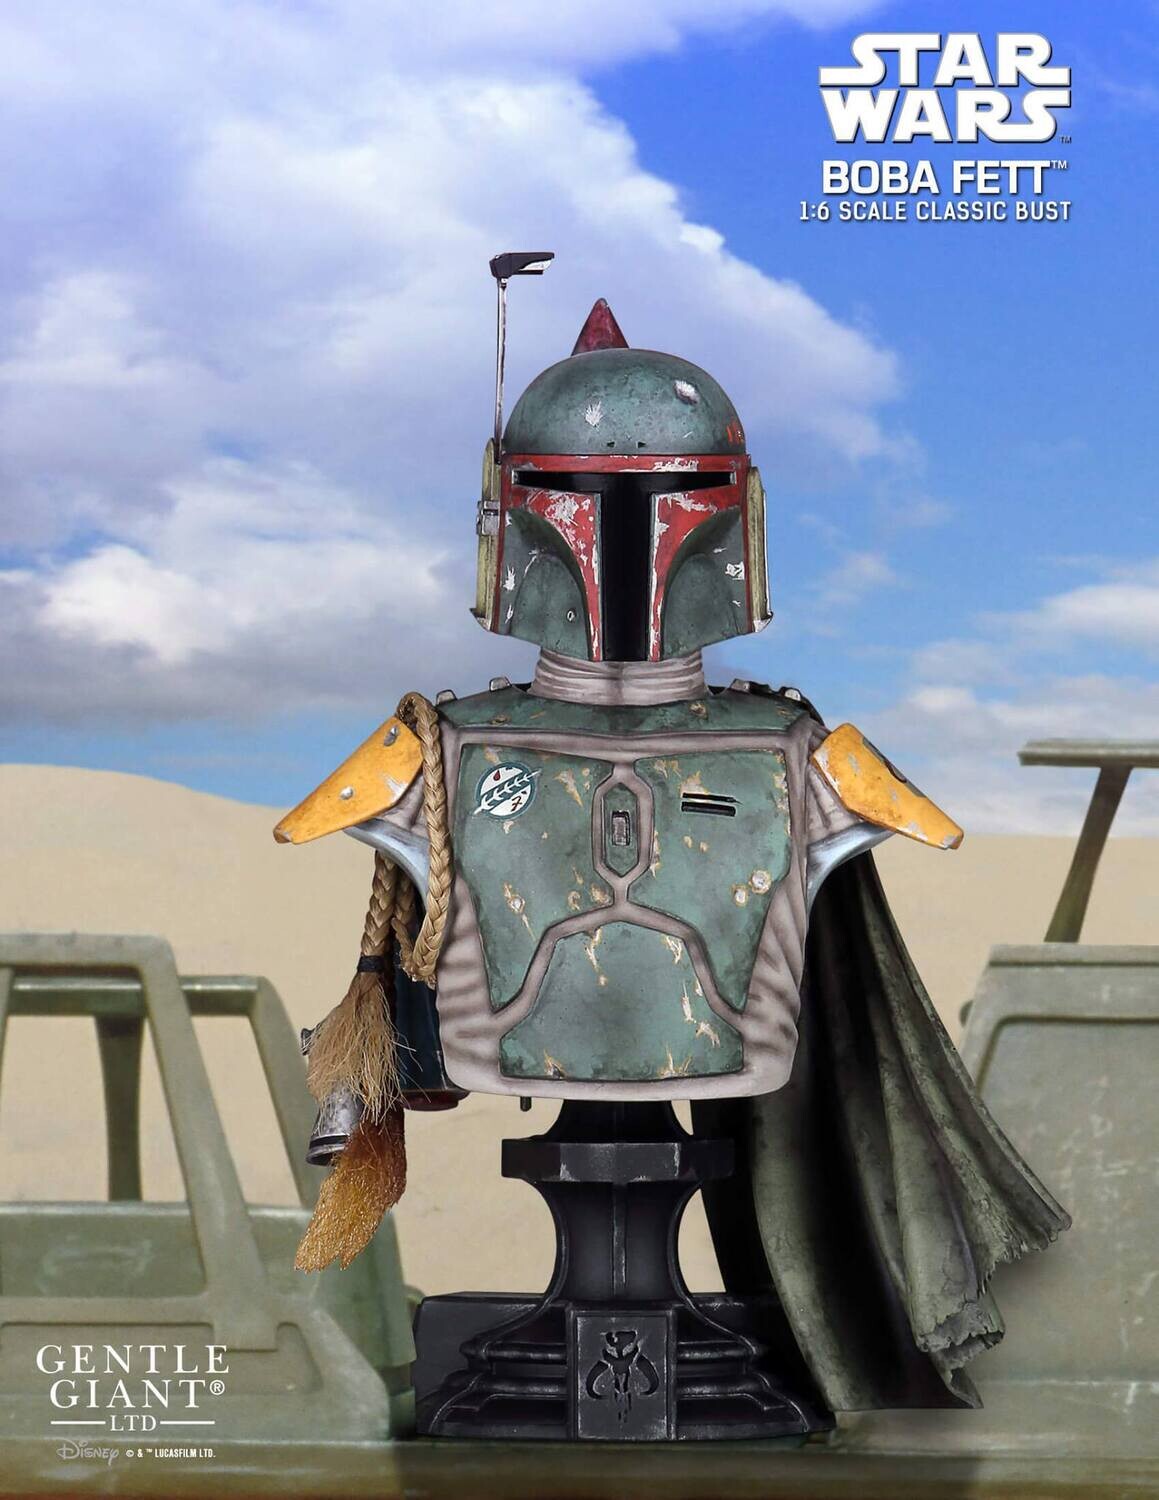 Star War The Return of the Jedi Boba Fett Classic 2016 PGM Exclusive Limited Edition of 300 Bust